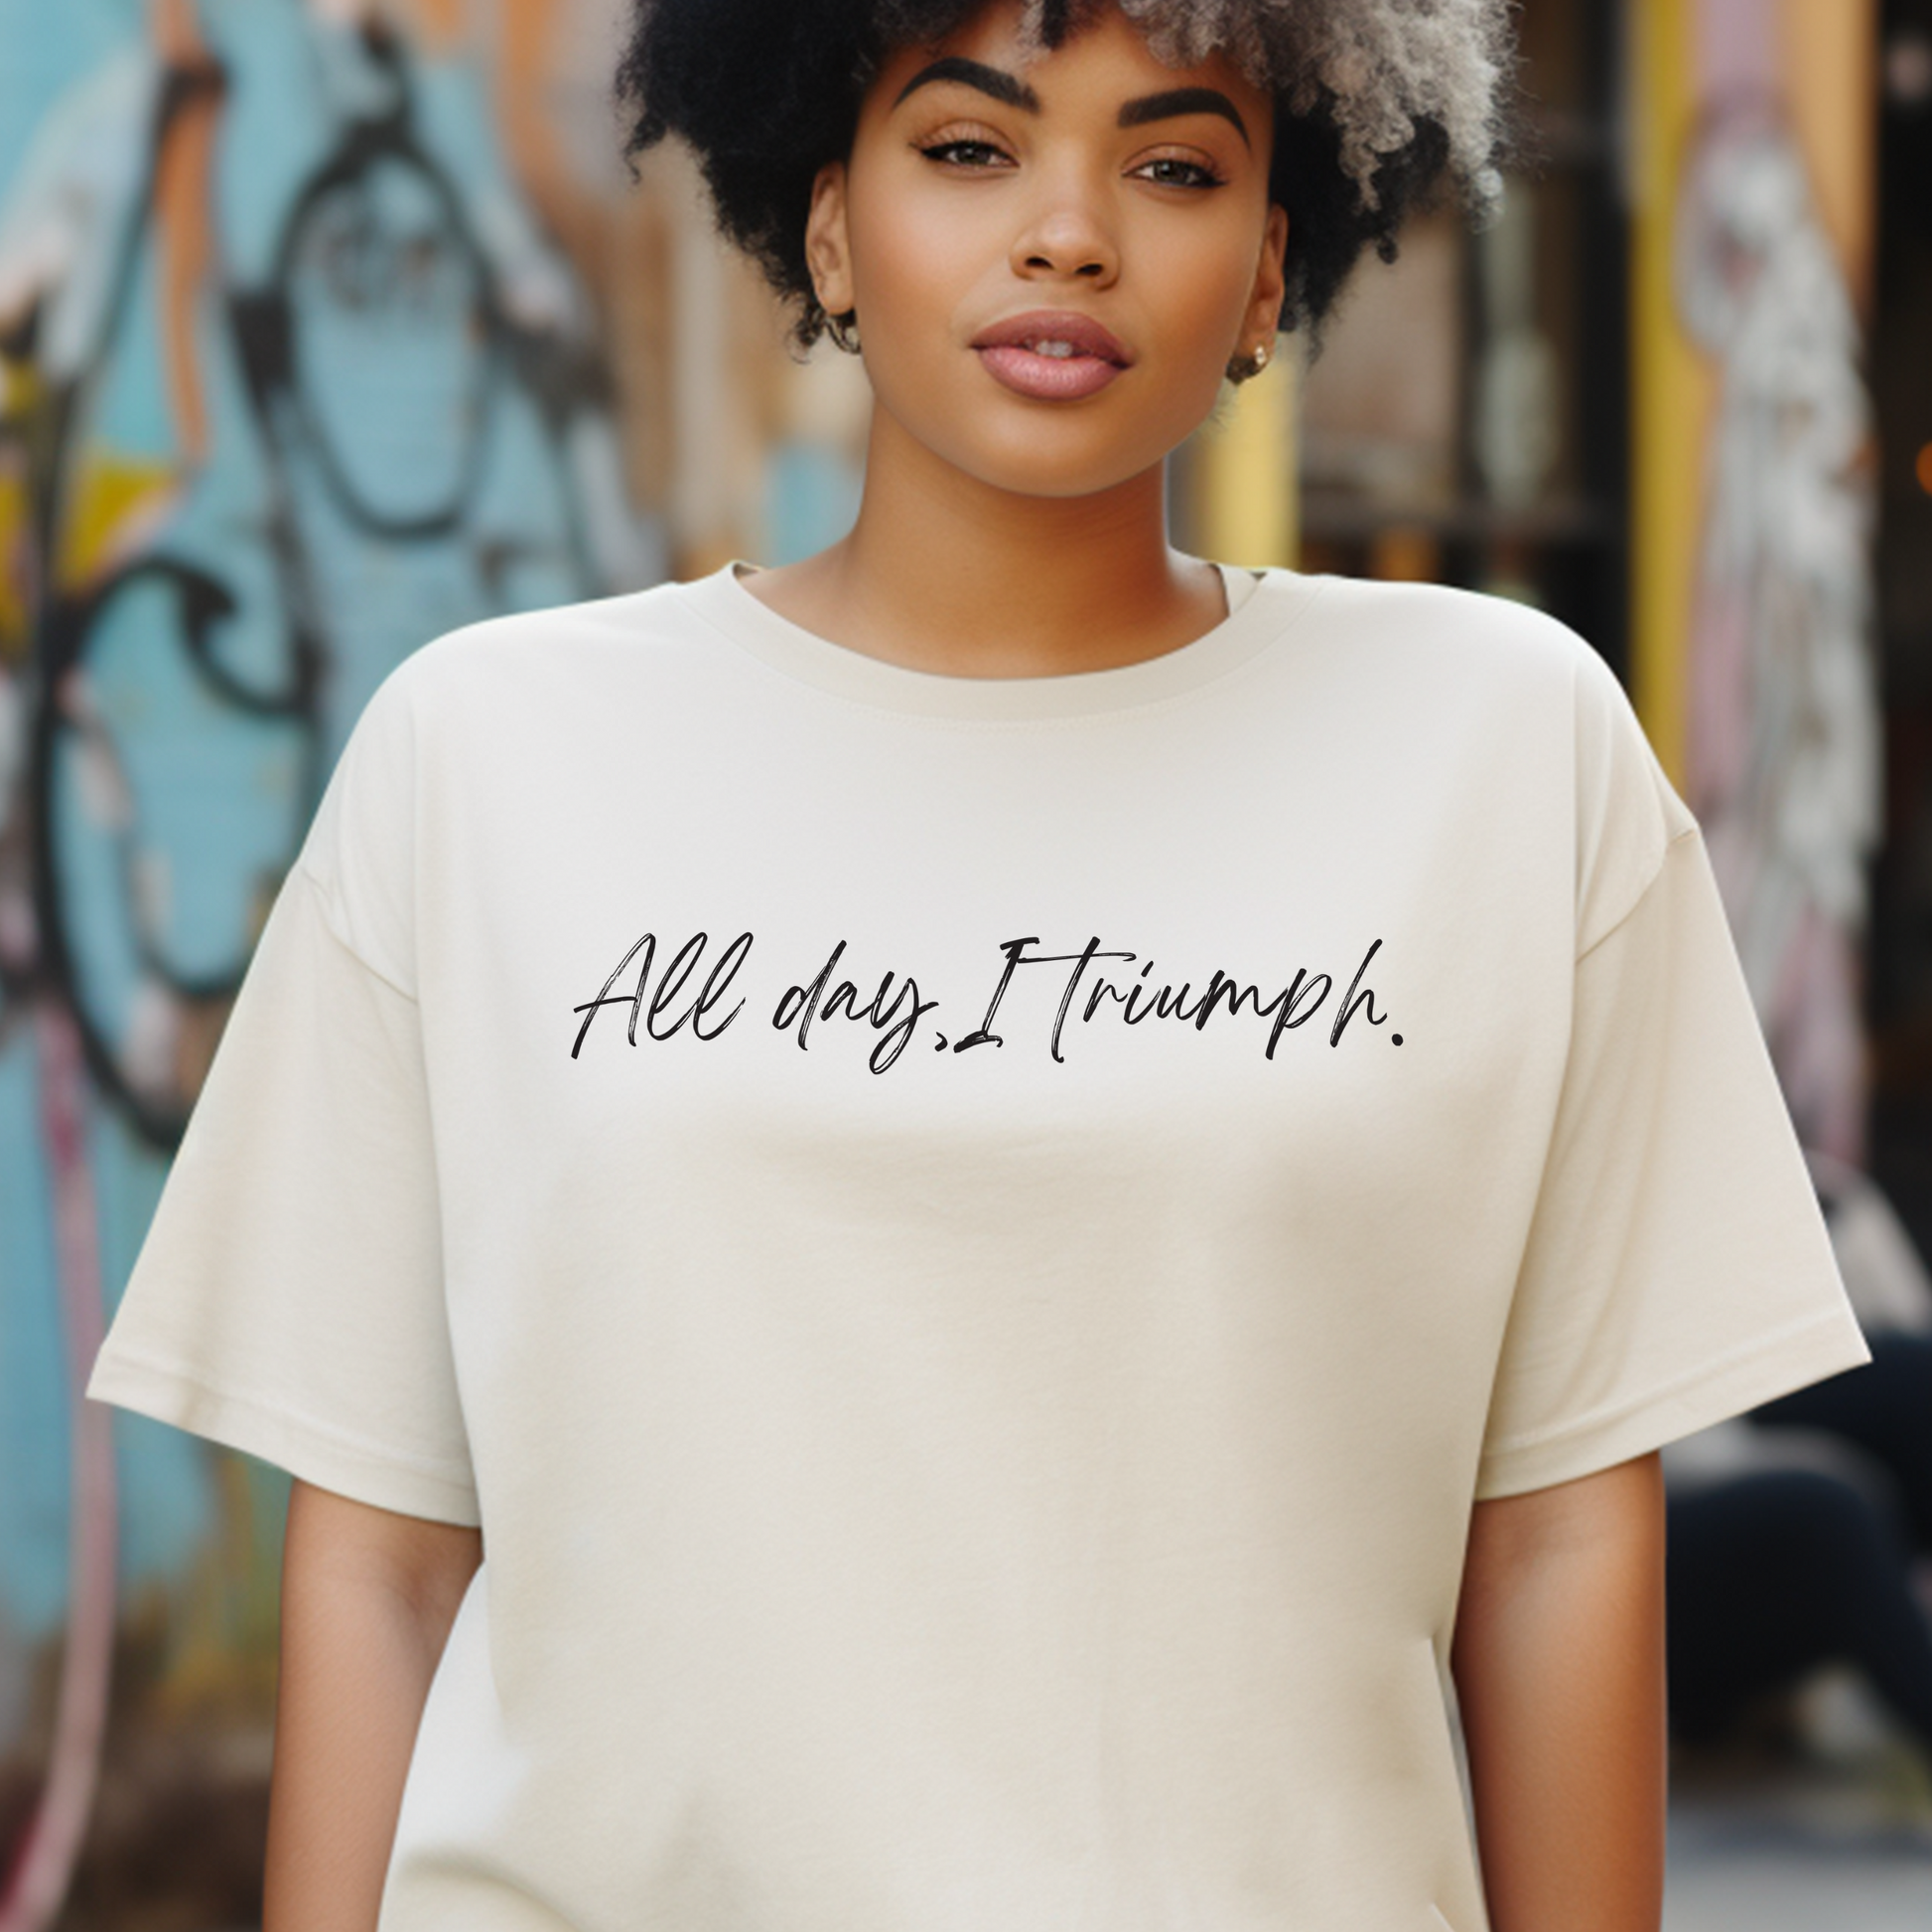 Elegant natural cream 'All Day I Triumph' t-shirt from Triumph Tees, designed to instill courage and faith. This faith apparel serves as a reminder of the God-given strength to triumph over life's obstacles.